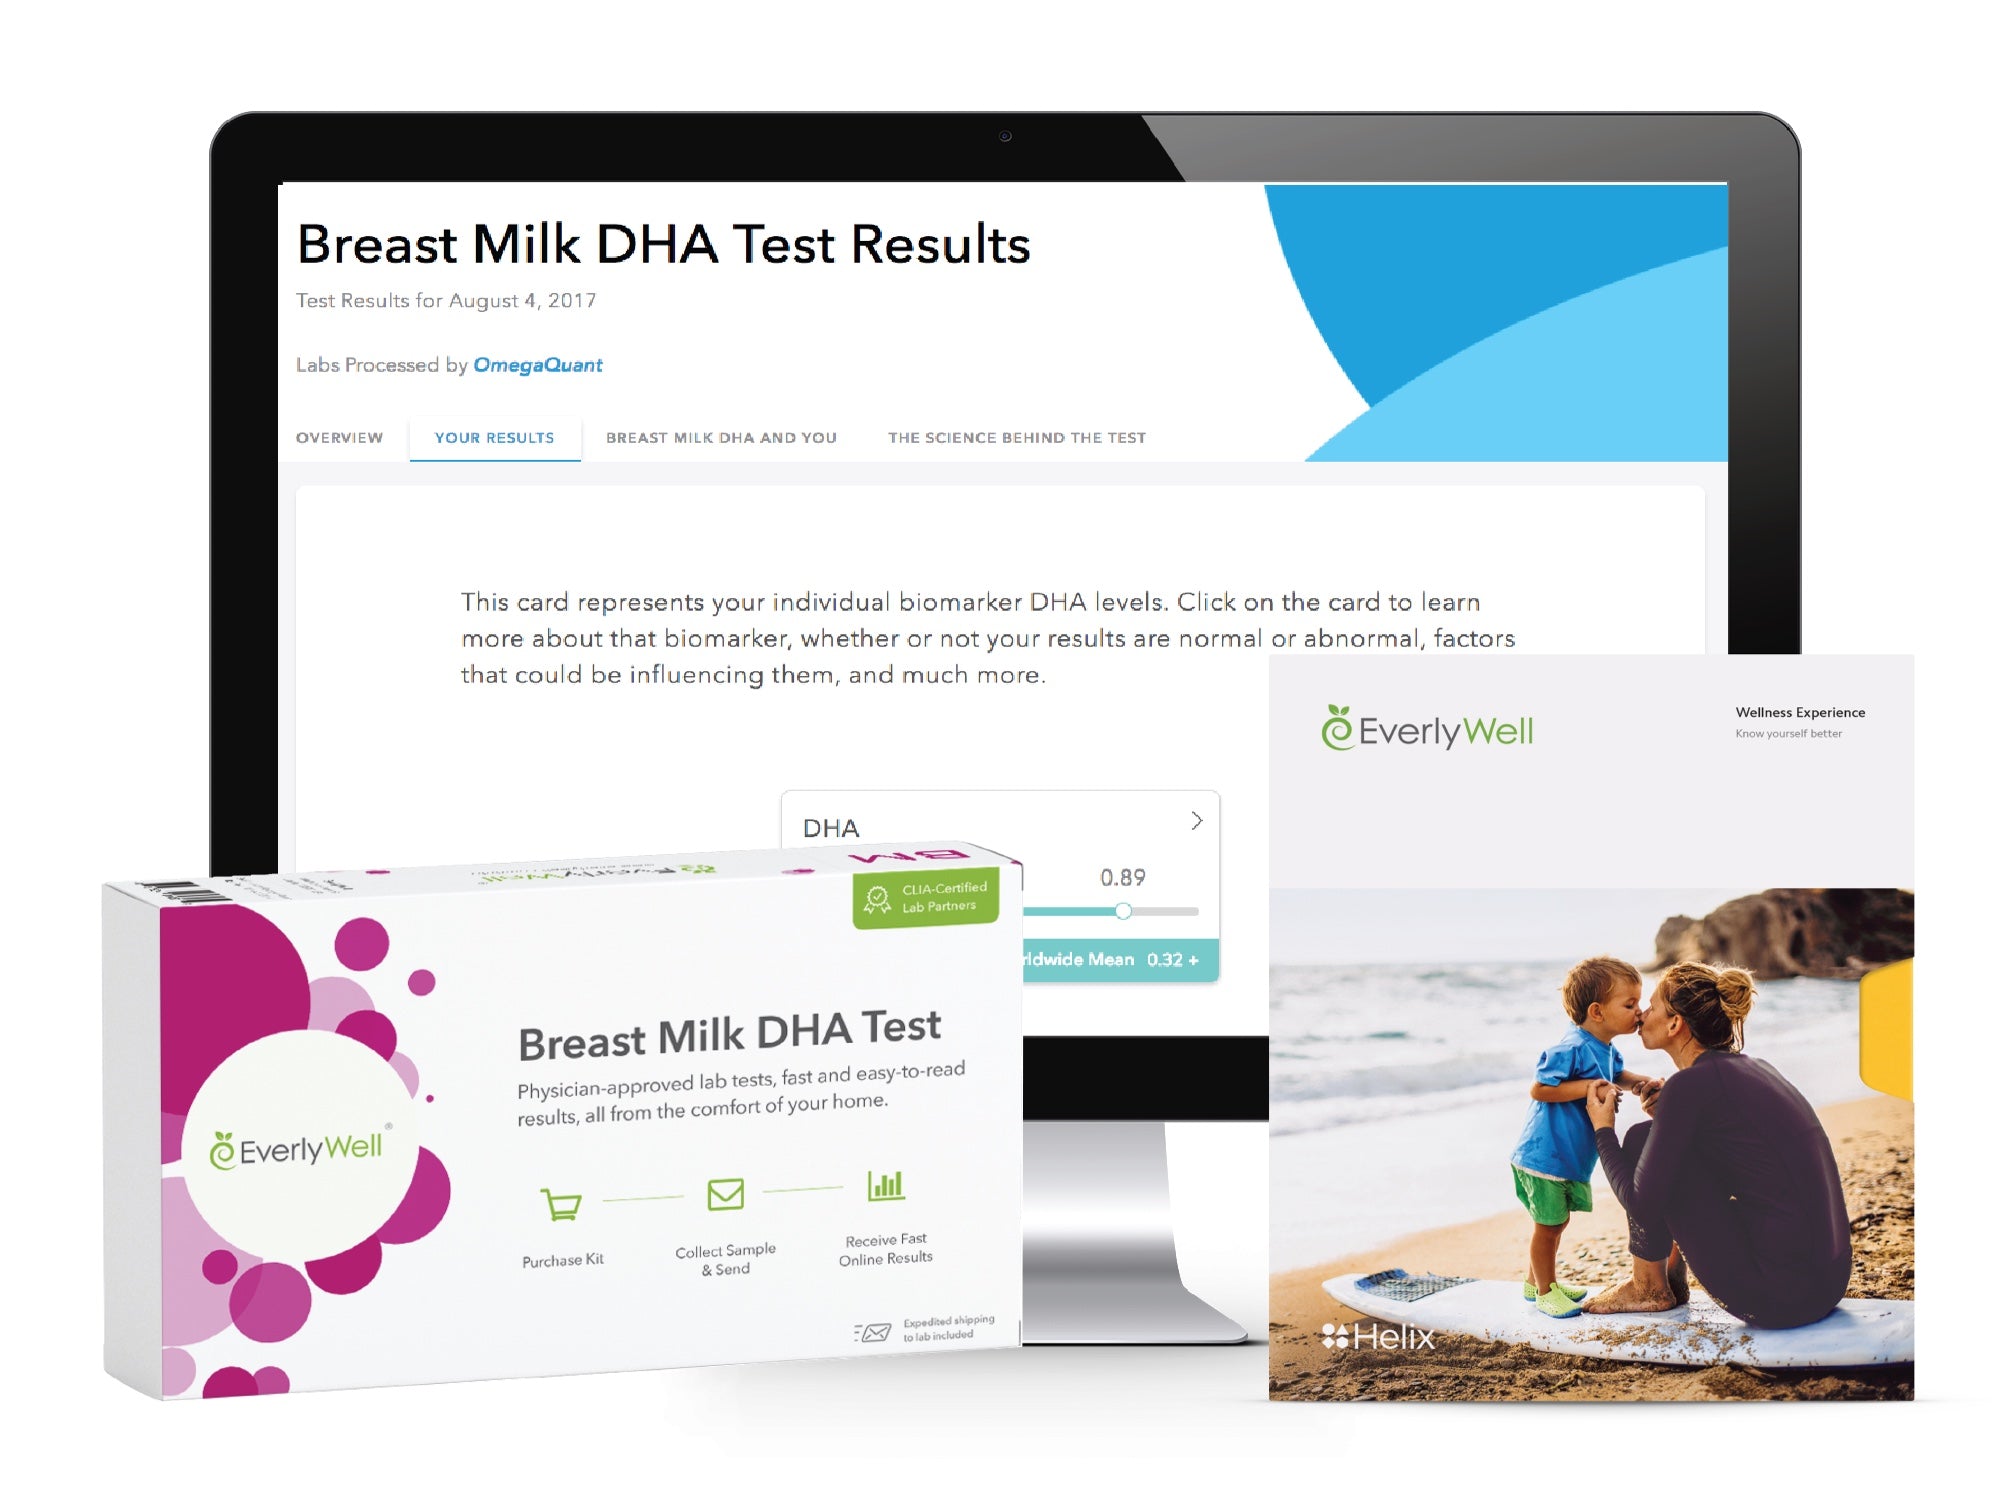 Learn the impact your DNA may have on your omega-3 DHA levels, and discover how much DHA is in your breast milk with the EverlyWell companion kit.